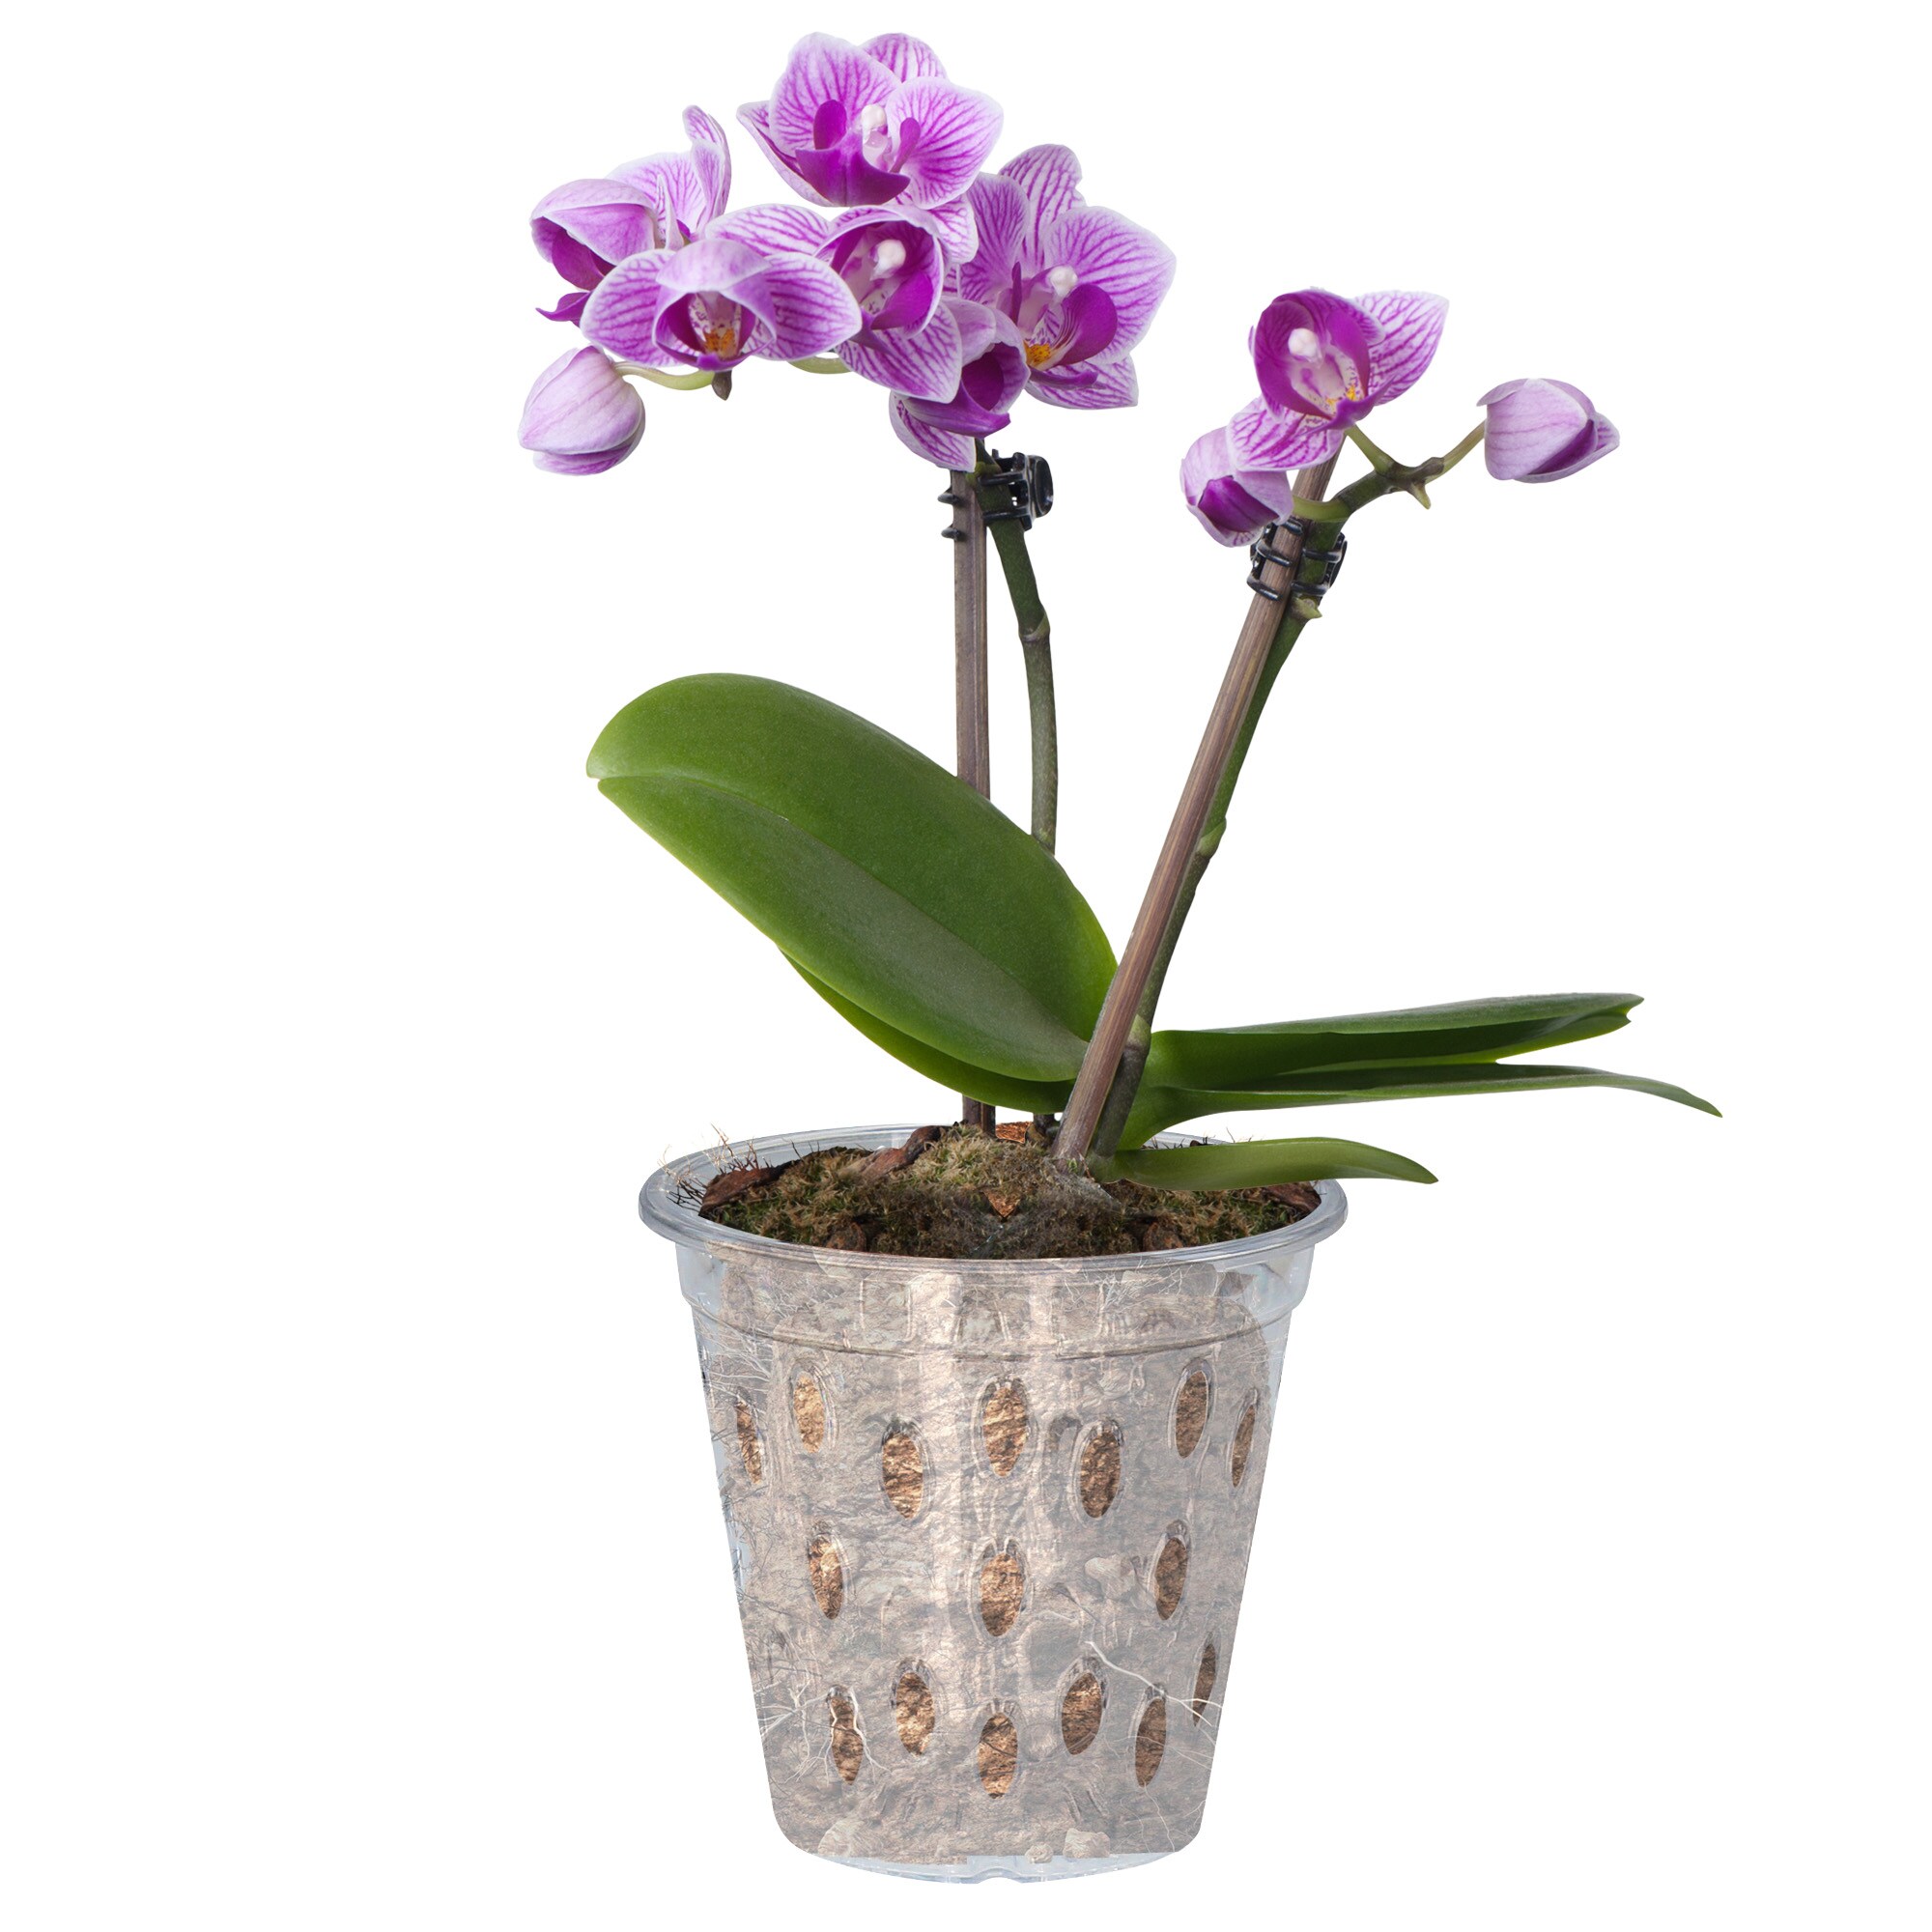 S/M /L Orchid Clear Flower Pot Resin Planter Container Home Garden Decorative 